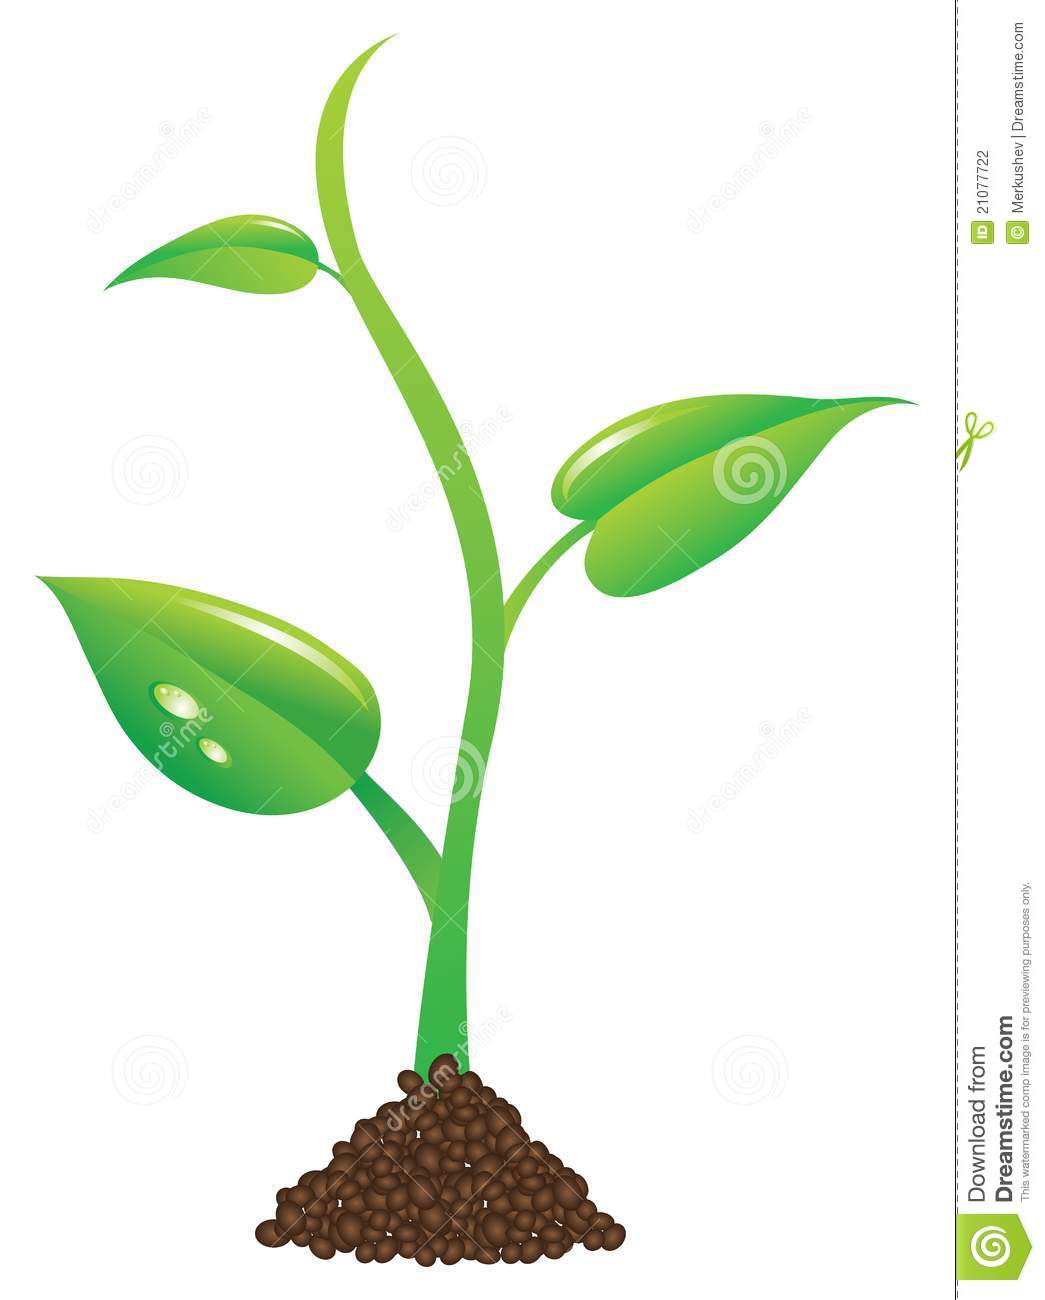 Panda free images plantwithrootsclipart. Planting clipart sprout